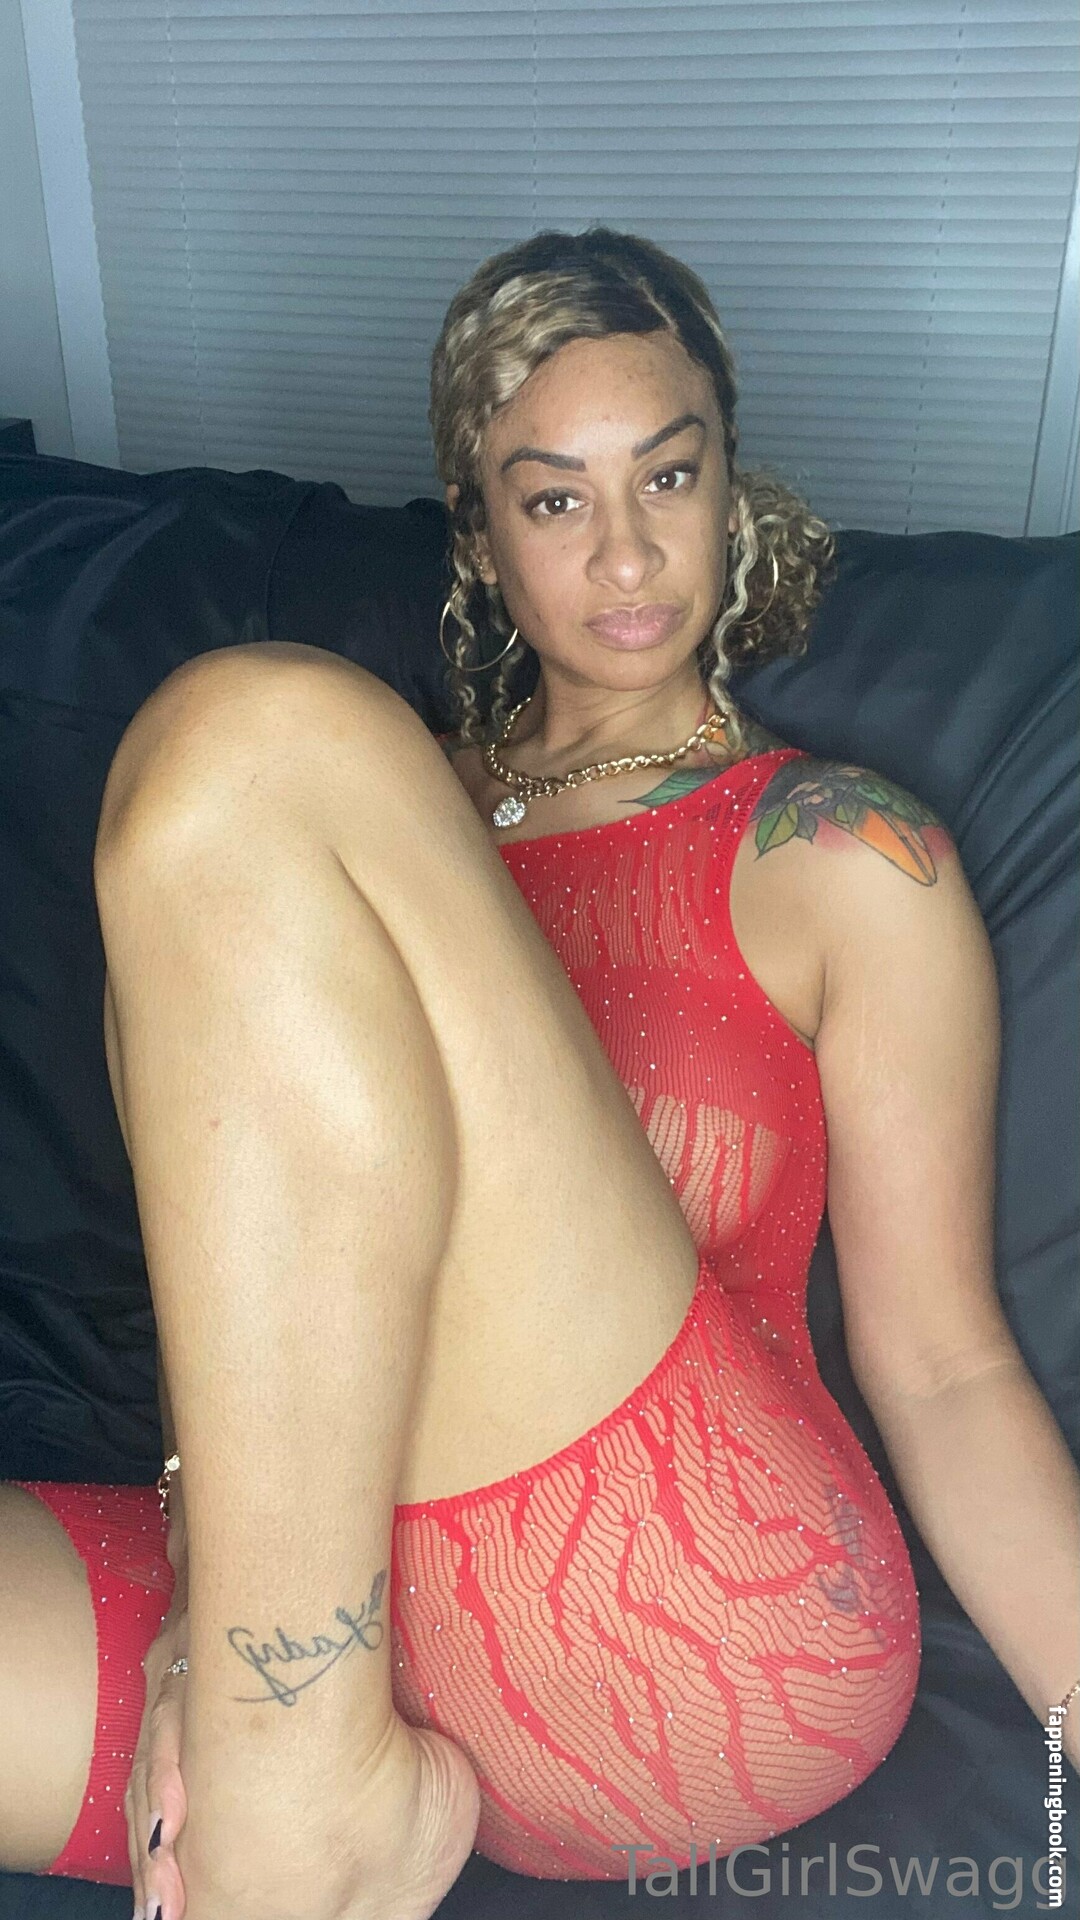 tallgirlswagg Nude OnlyFans Leaks